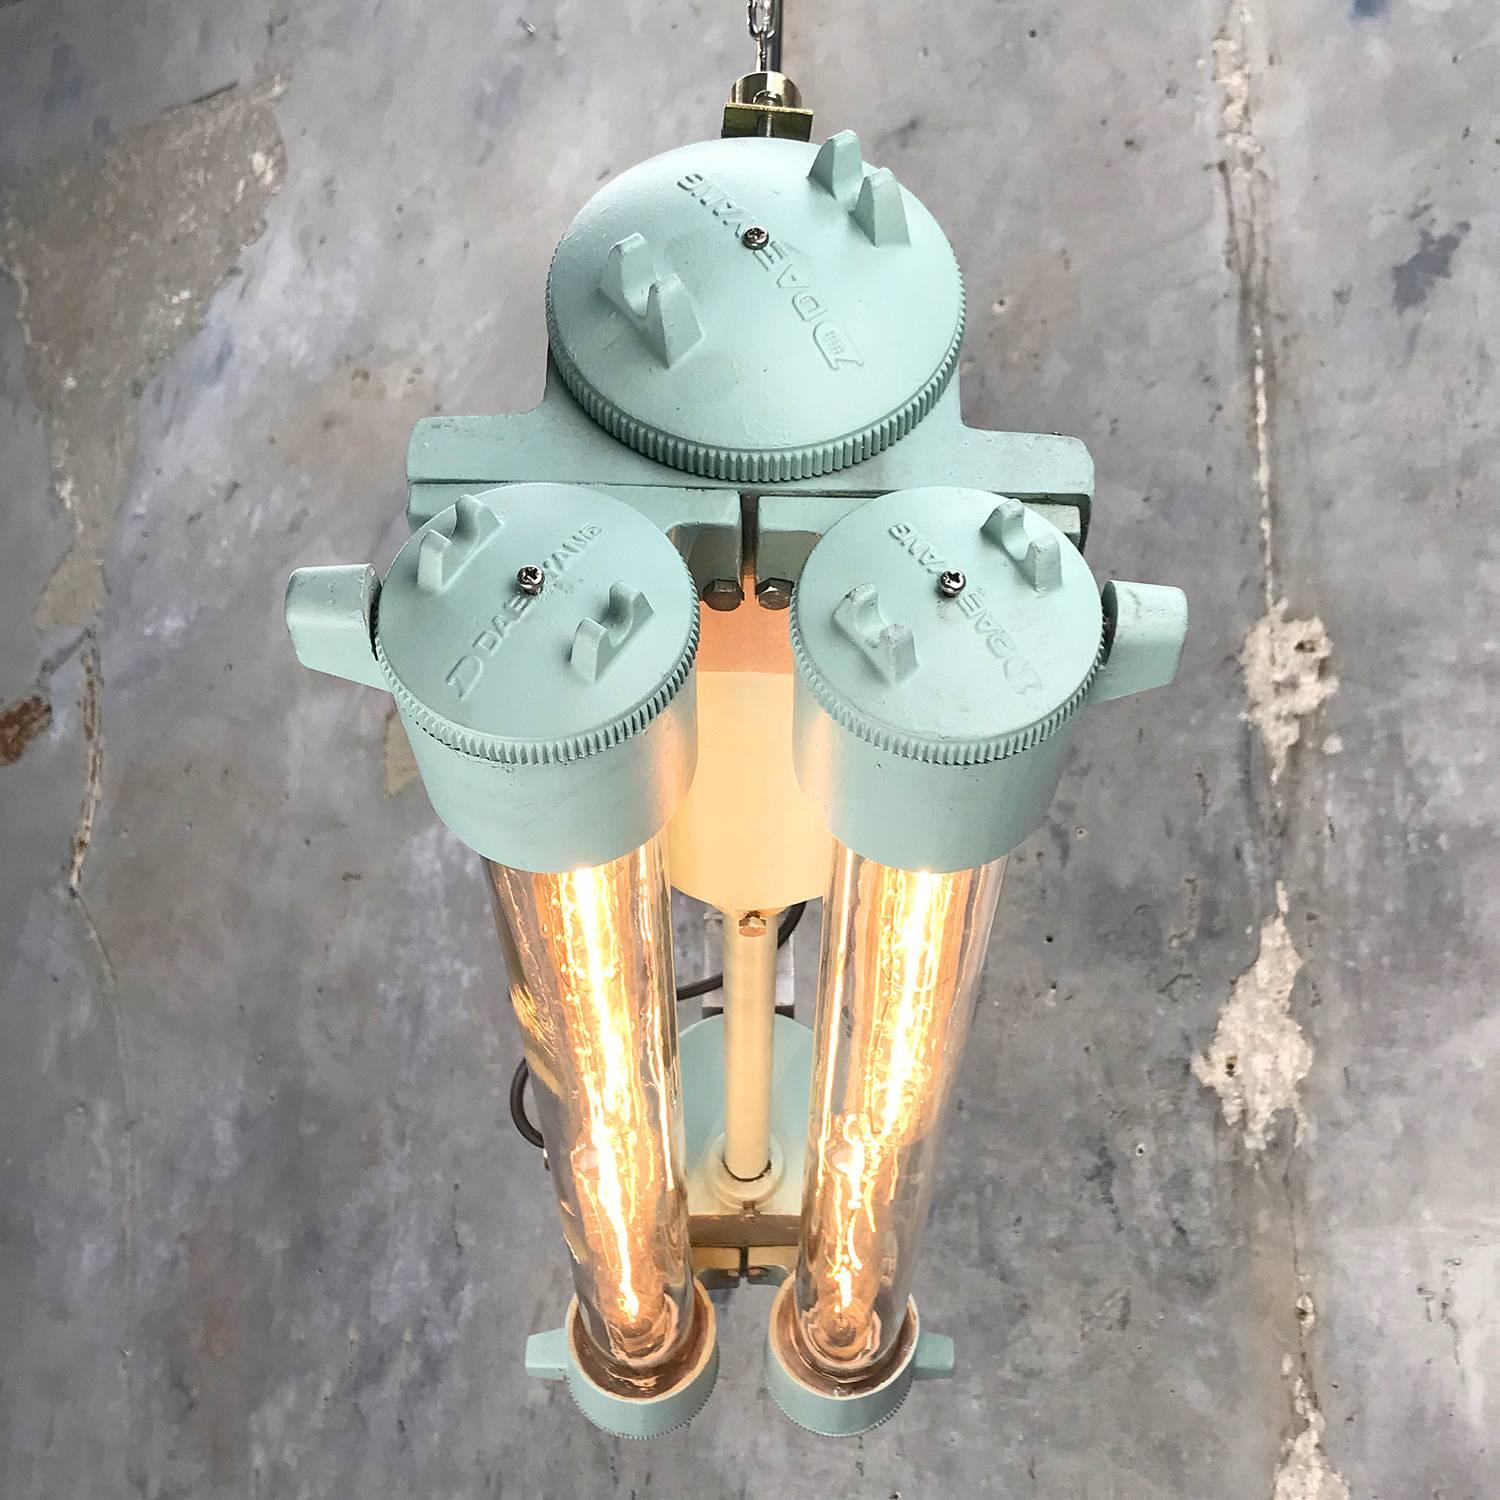 1970s Korean Industrial Cast Aluminum Edison Flame Proof Strip Light - Duck Egg In Good Condition For Sale In Leicester, Leicestershire